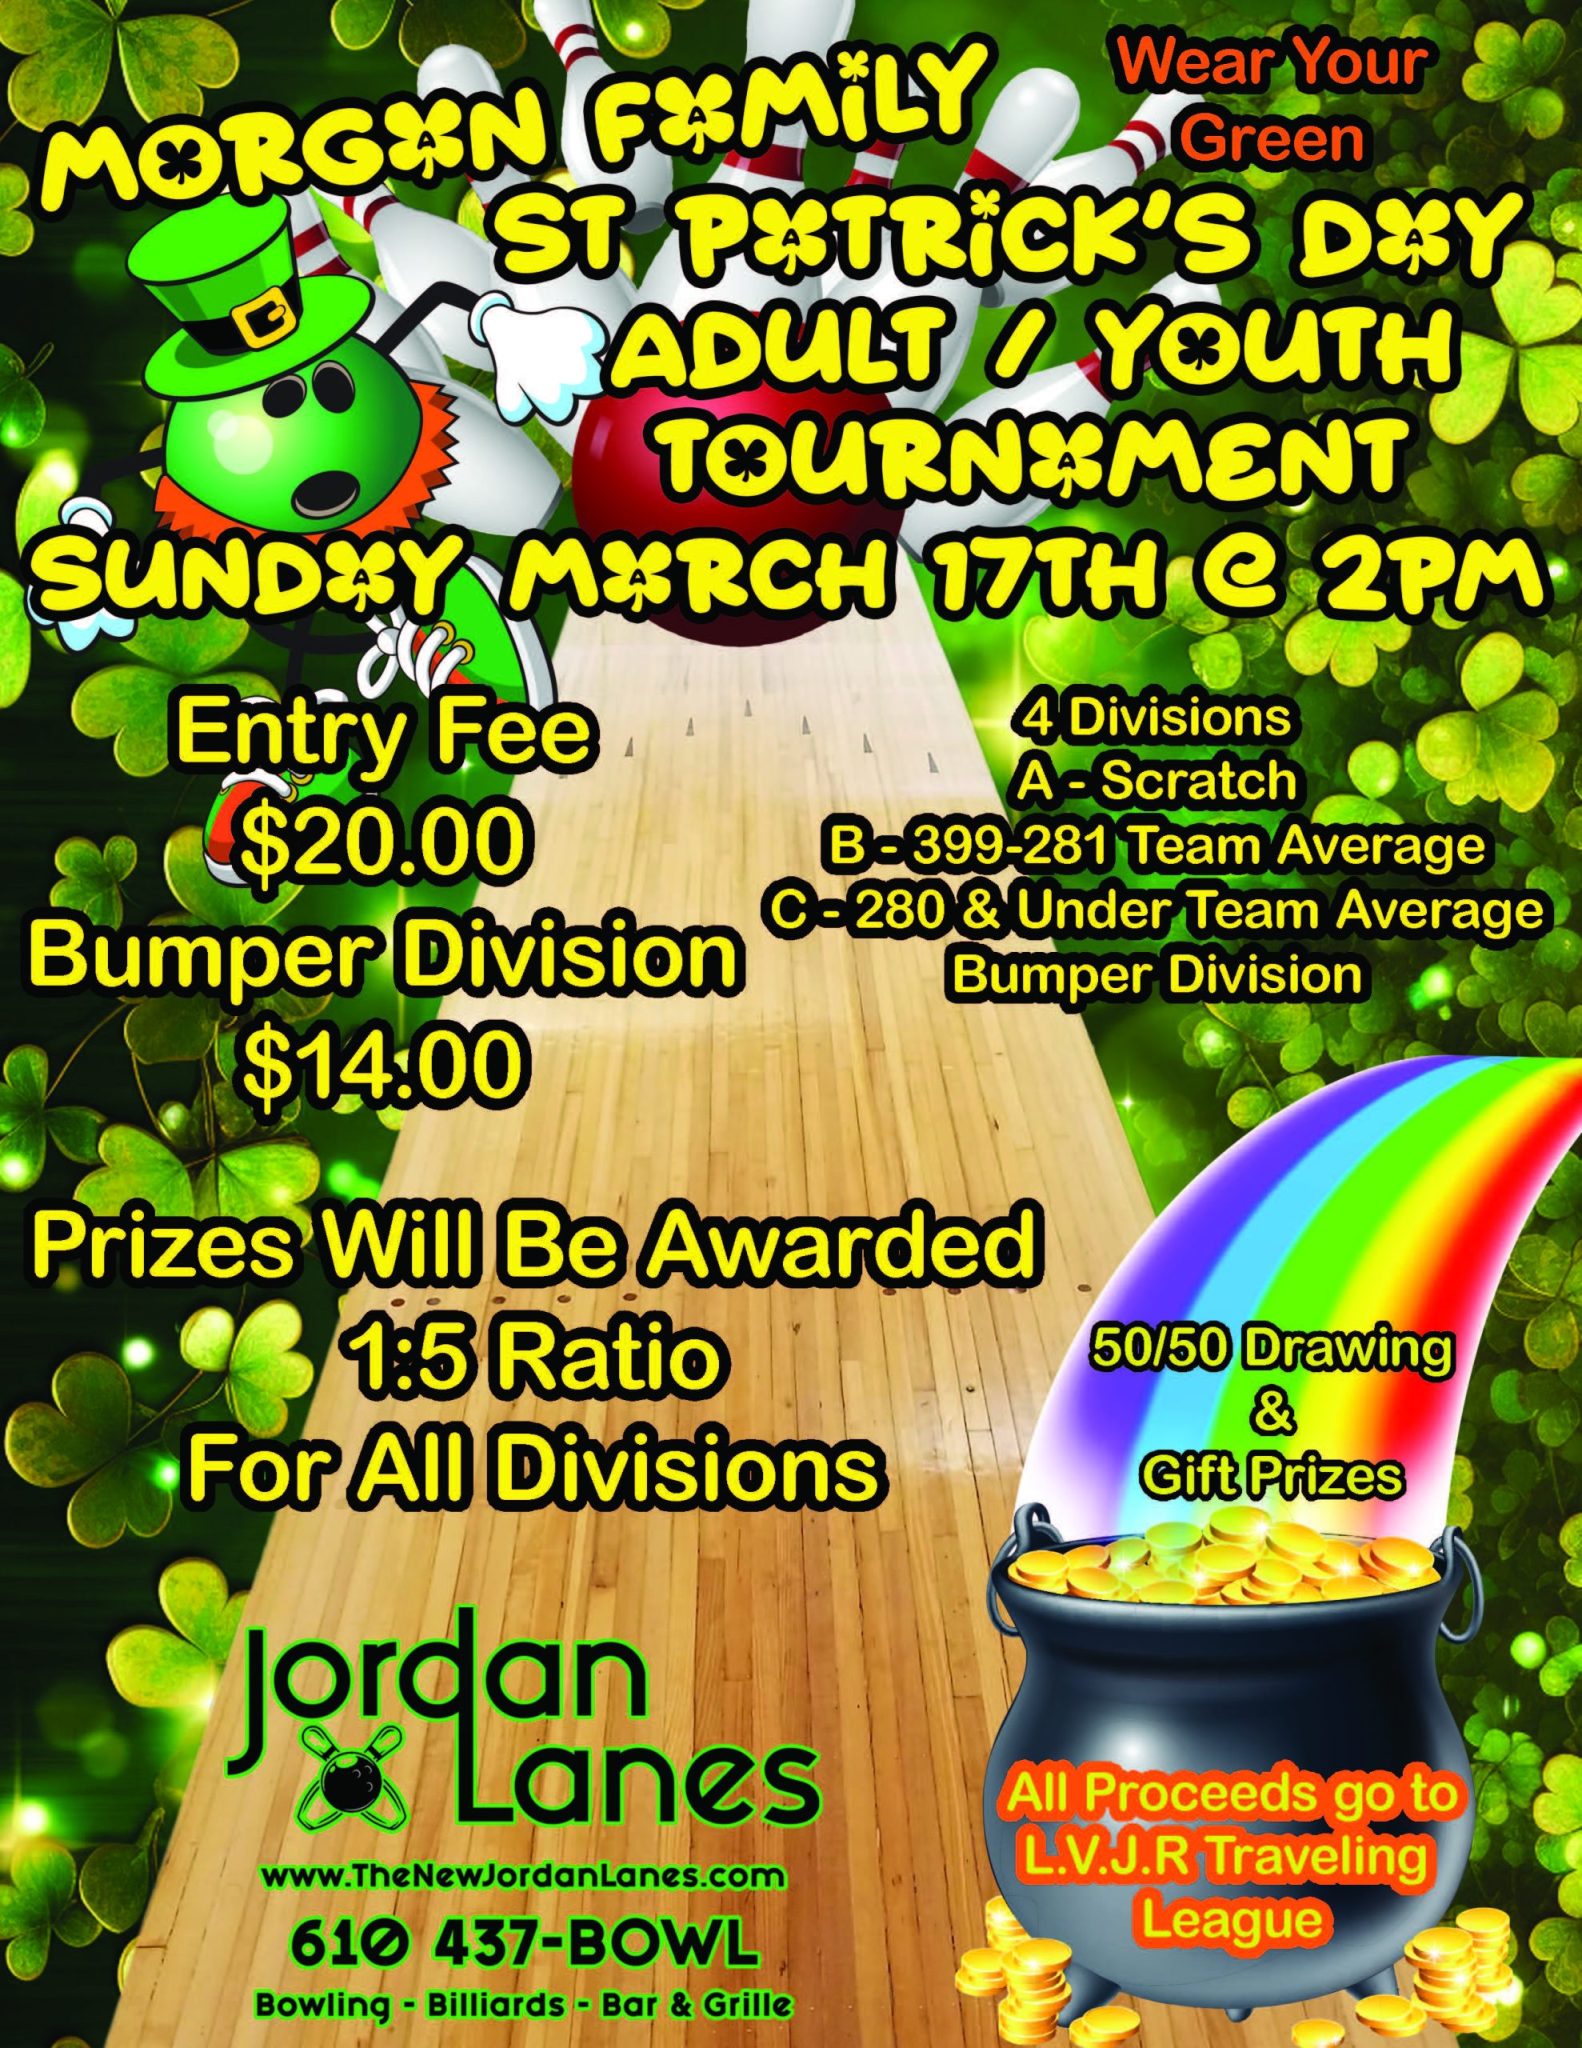 Morgan Family Adult / Youth Tournament 5